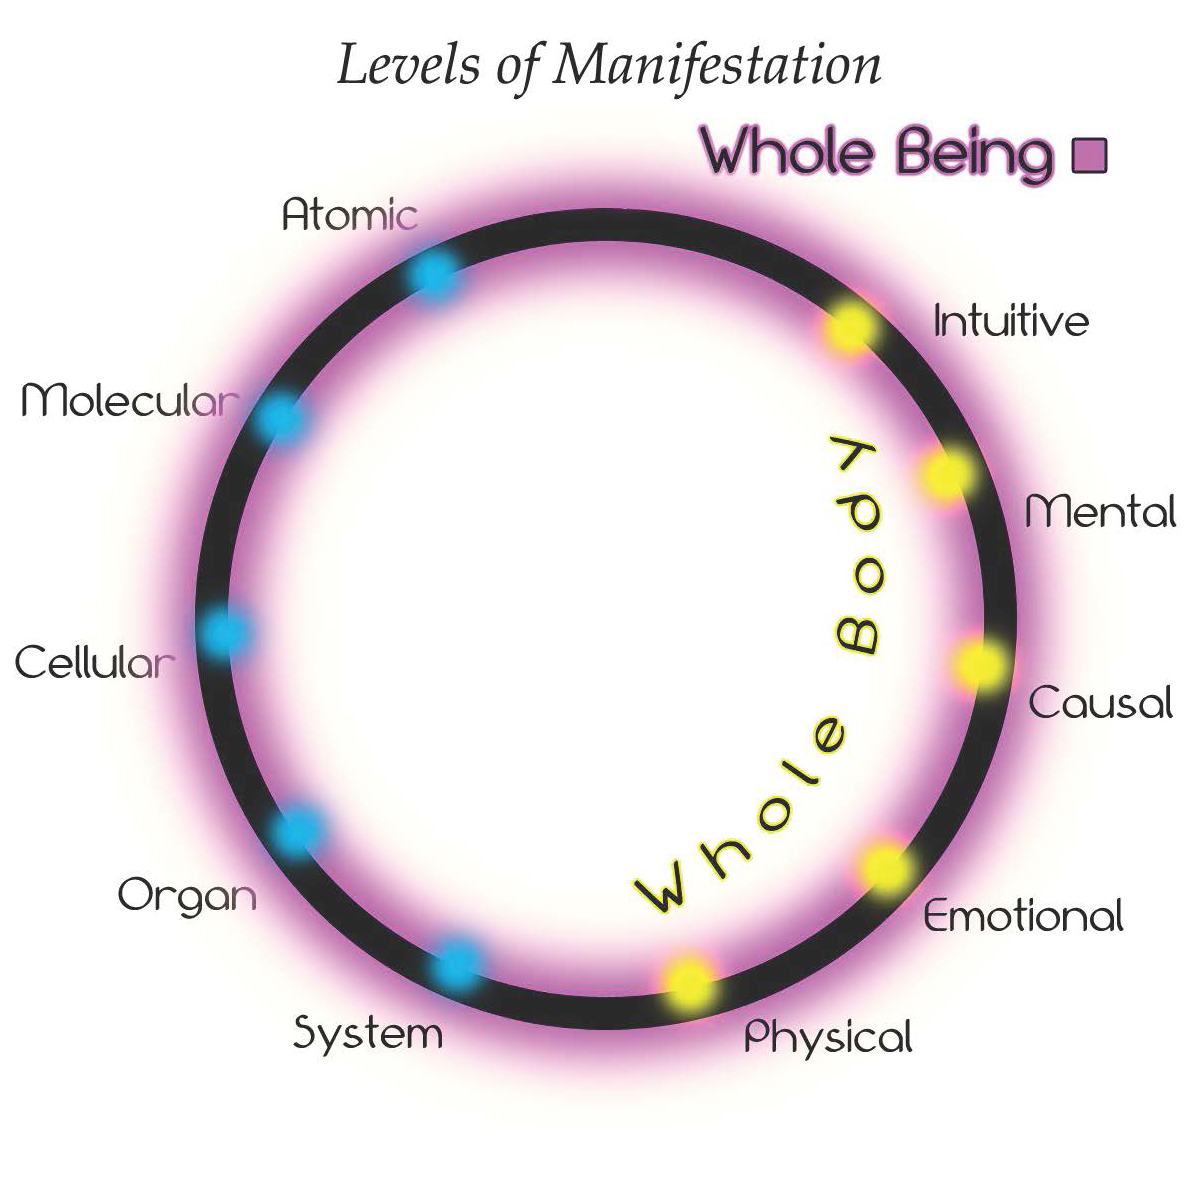 graphic of the levels of manifestation